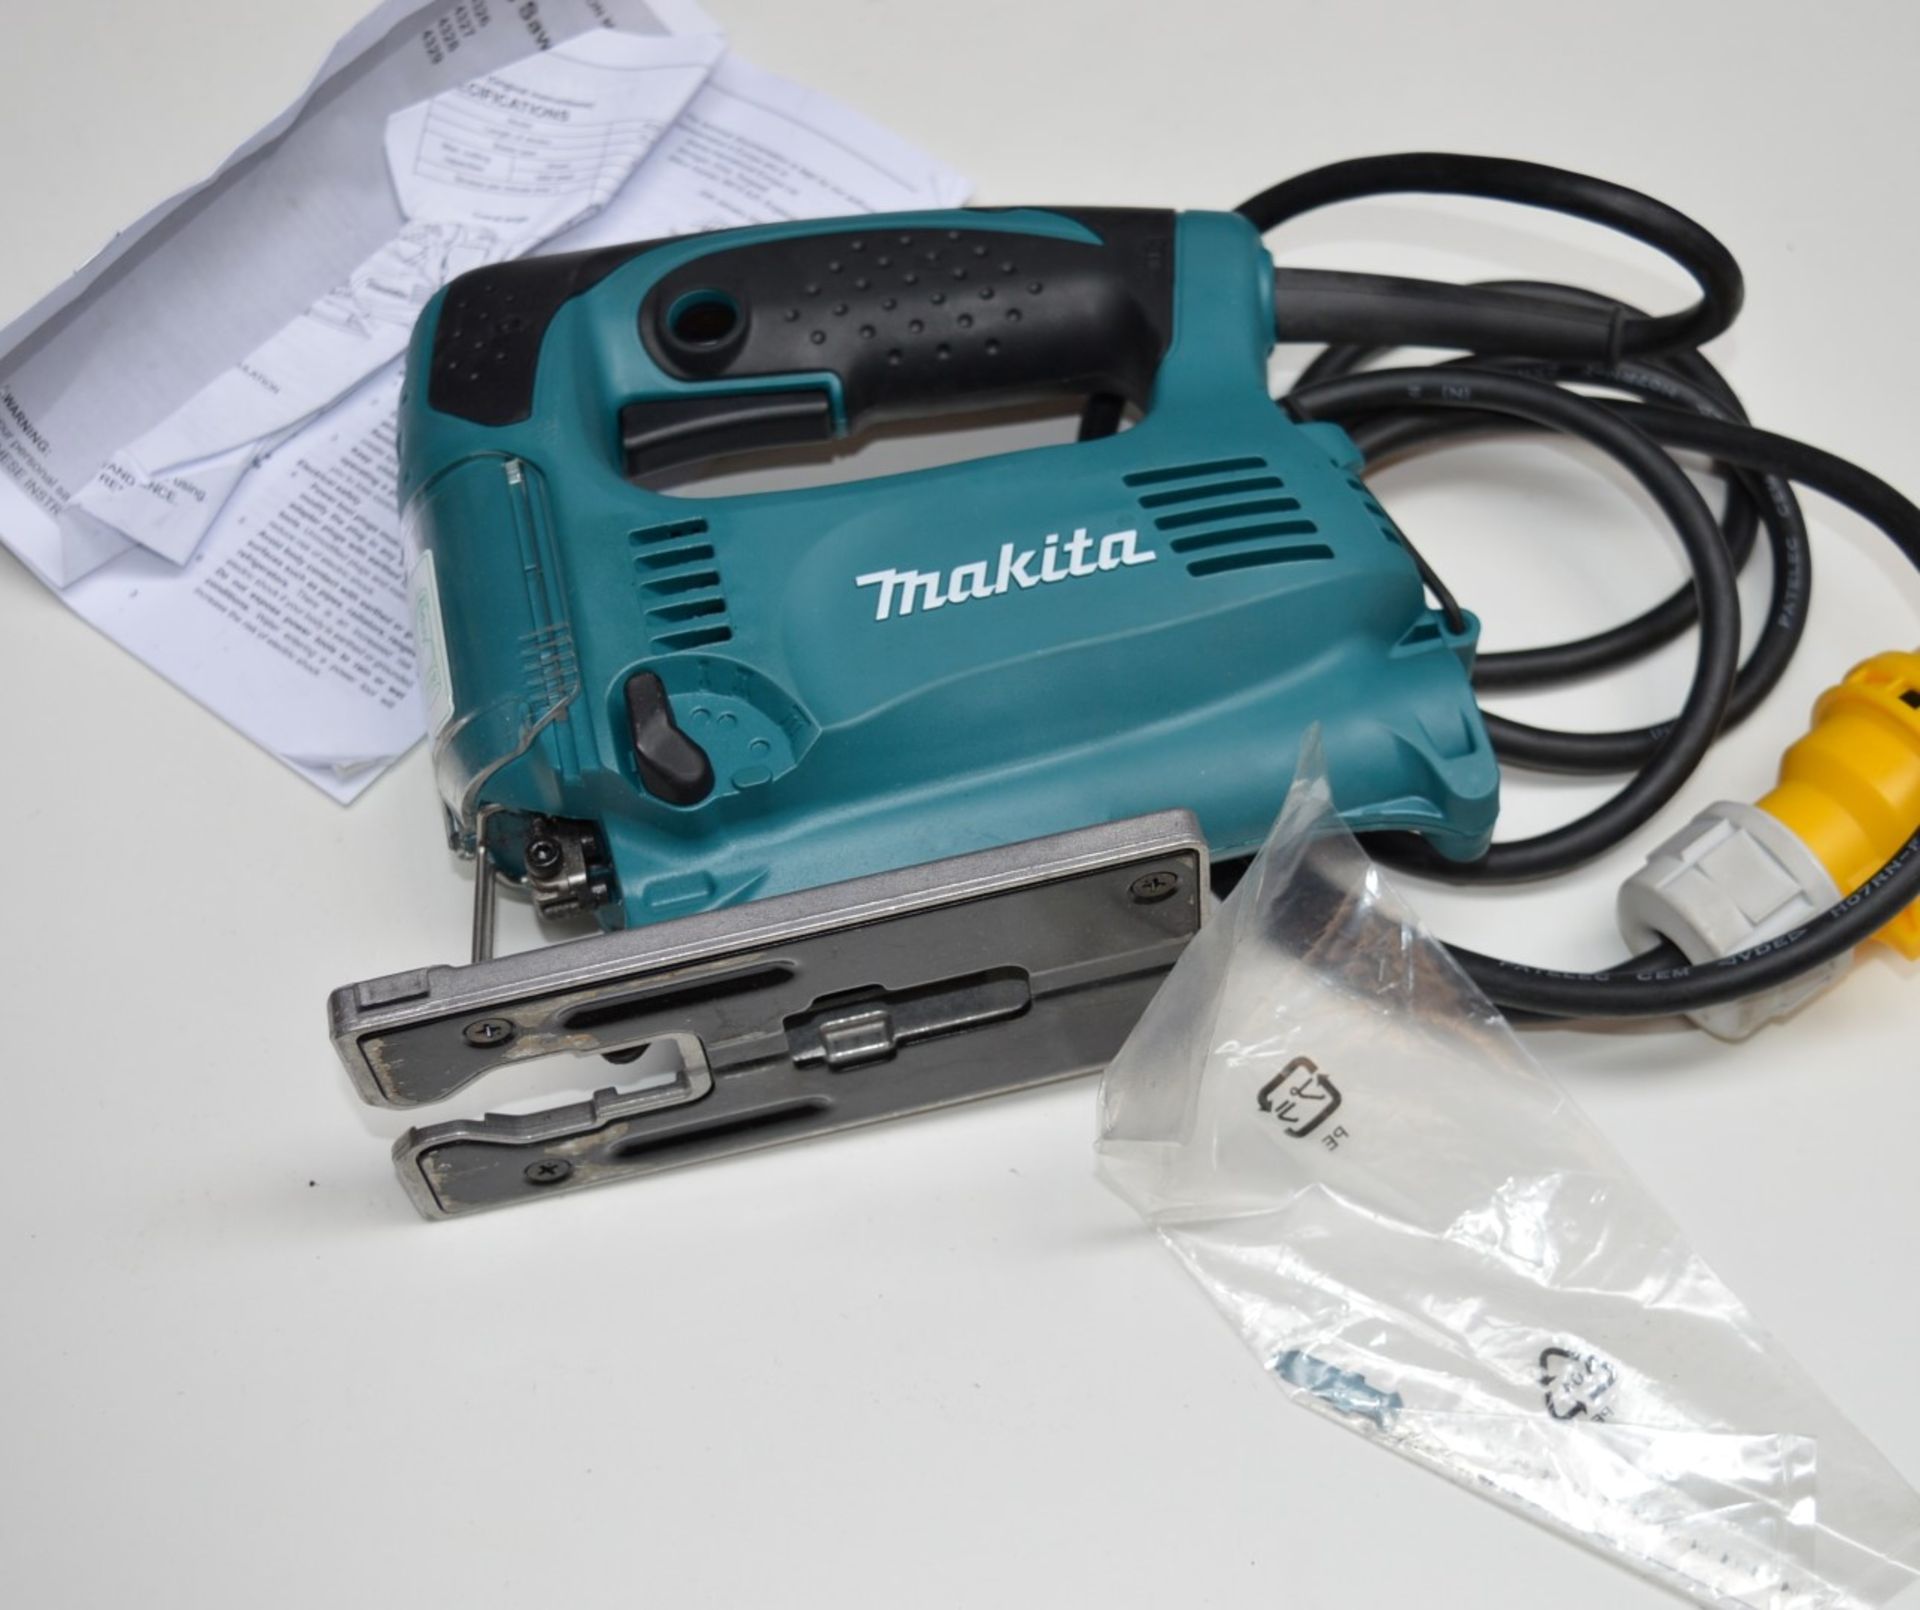 1 x Makita 4329 Professional Variable-Speed Corded Jigsaw 1100V - Boxed With Instructions - Hardly - Image 3 of 3